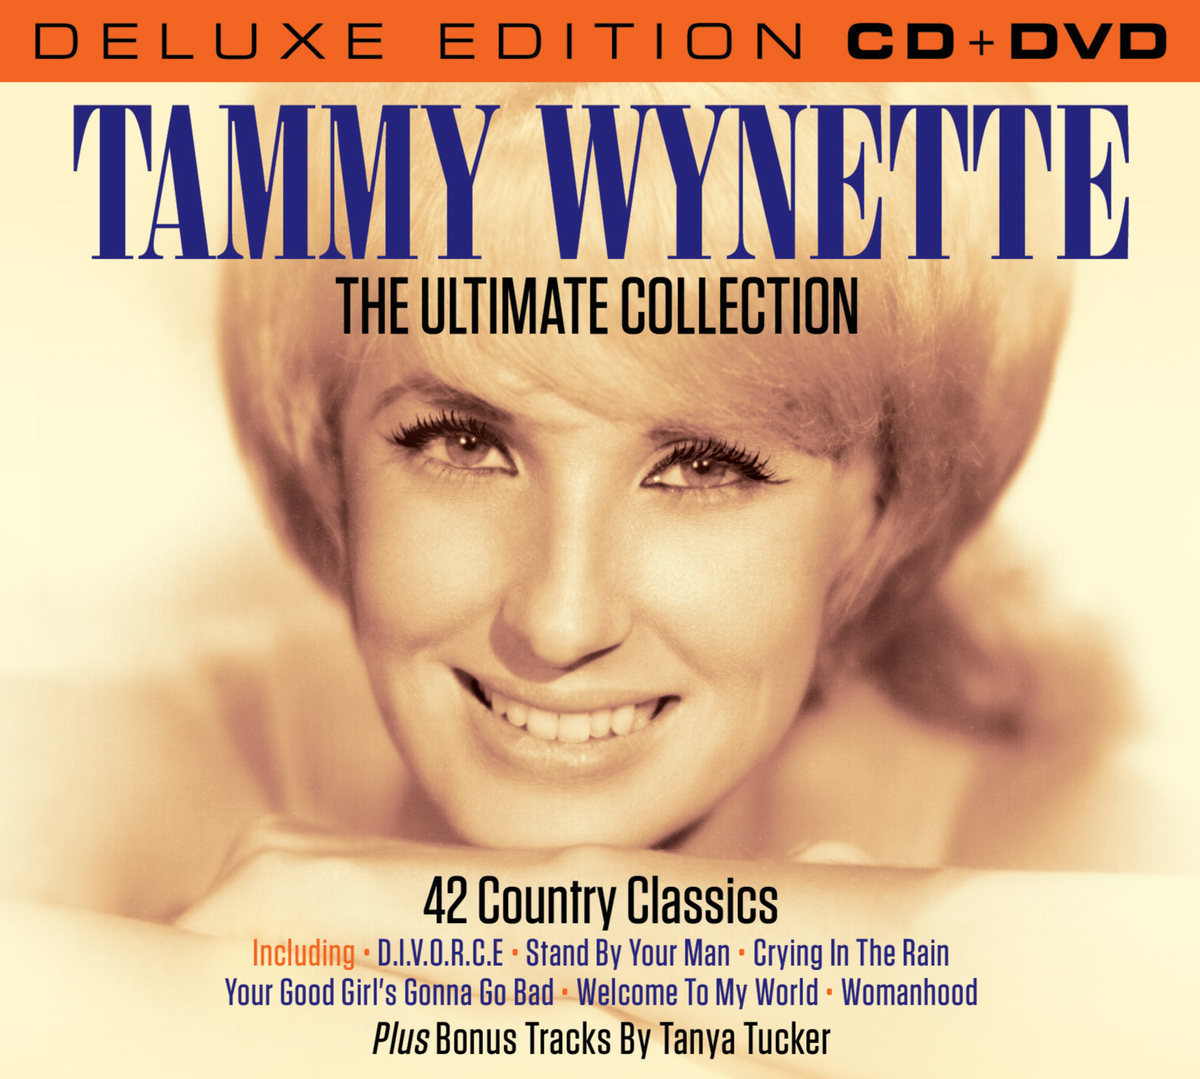 Tammy Wynette - The Ultimate Collection CD / DVD 2017 with Bonus Track ...